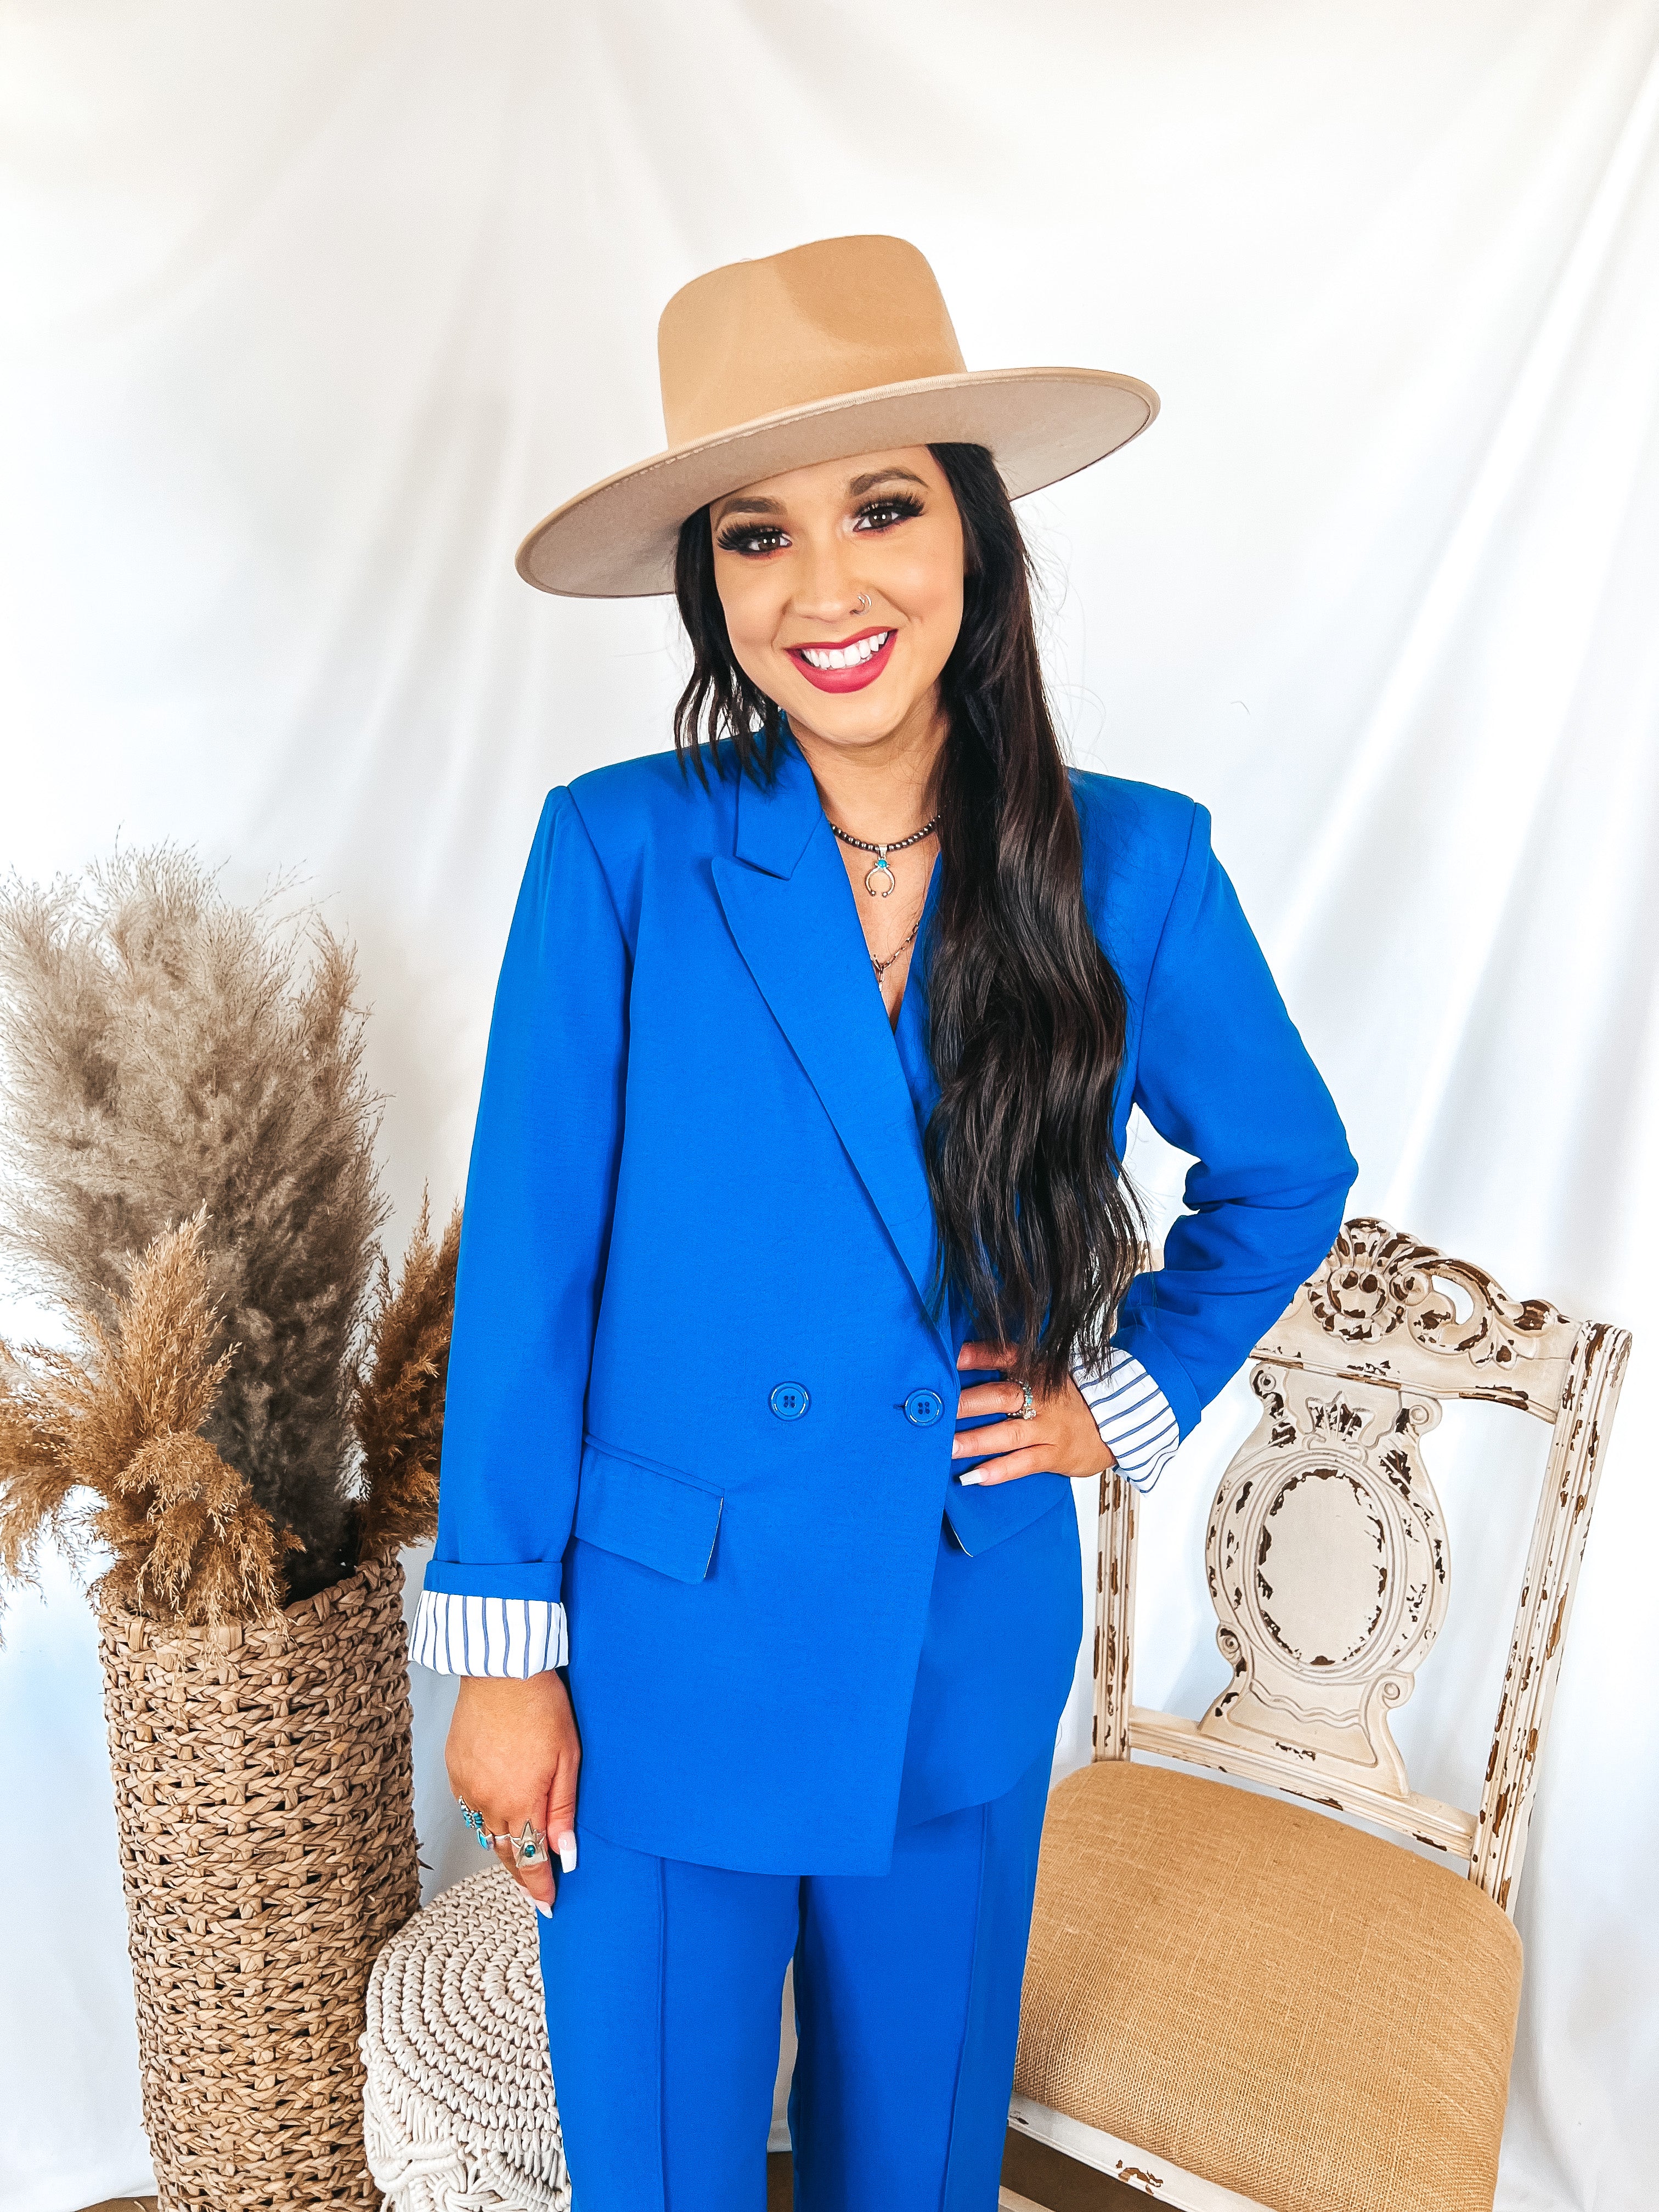 Bossy Business Double Button Blazer with Pockets in Royal Blue - Giddy Up Glamour Boutique